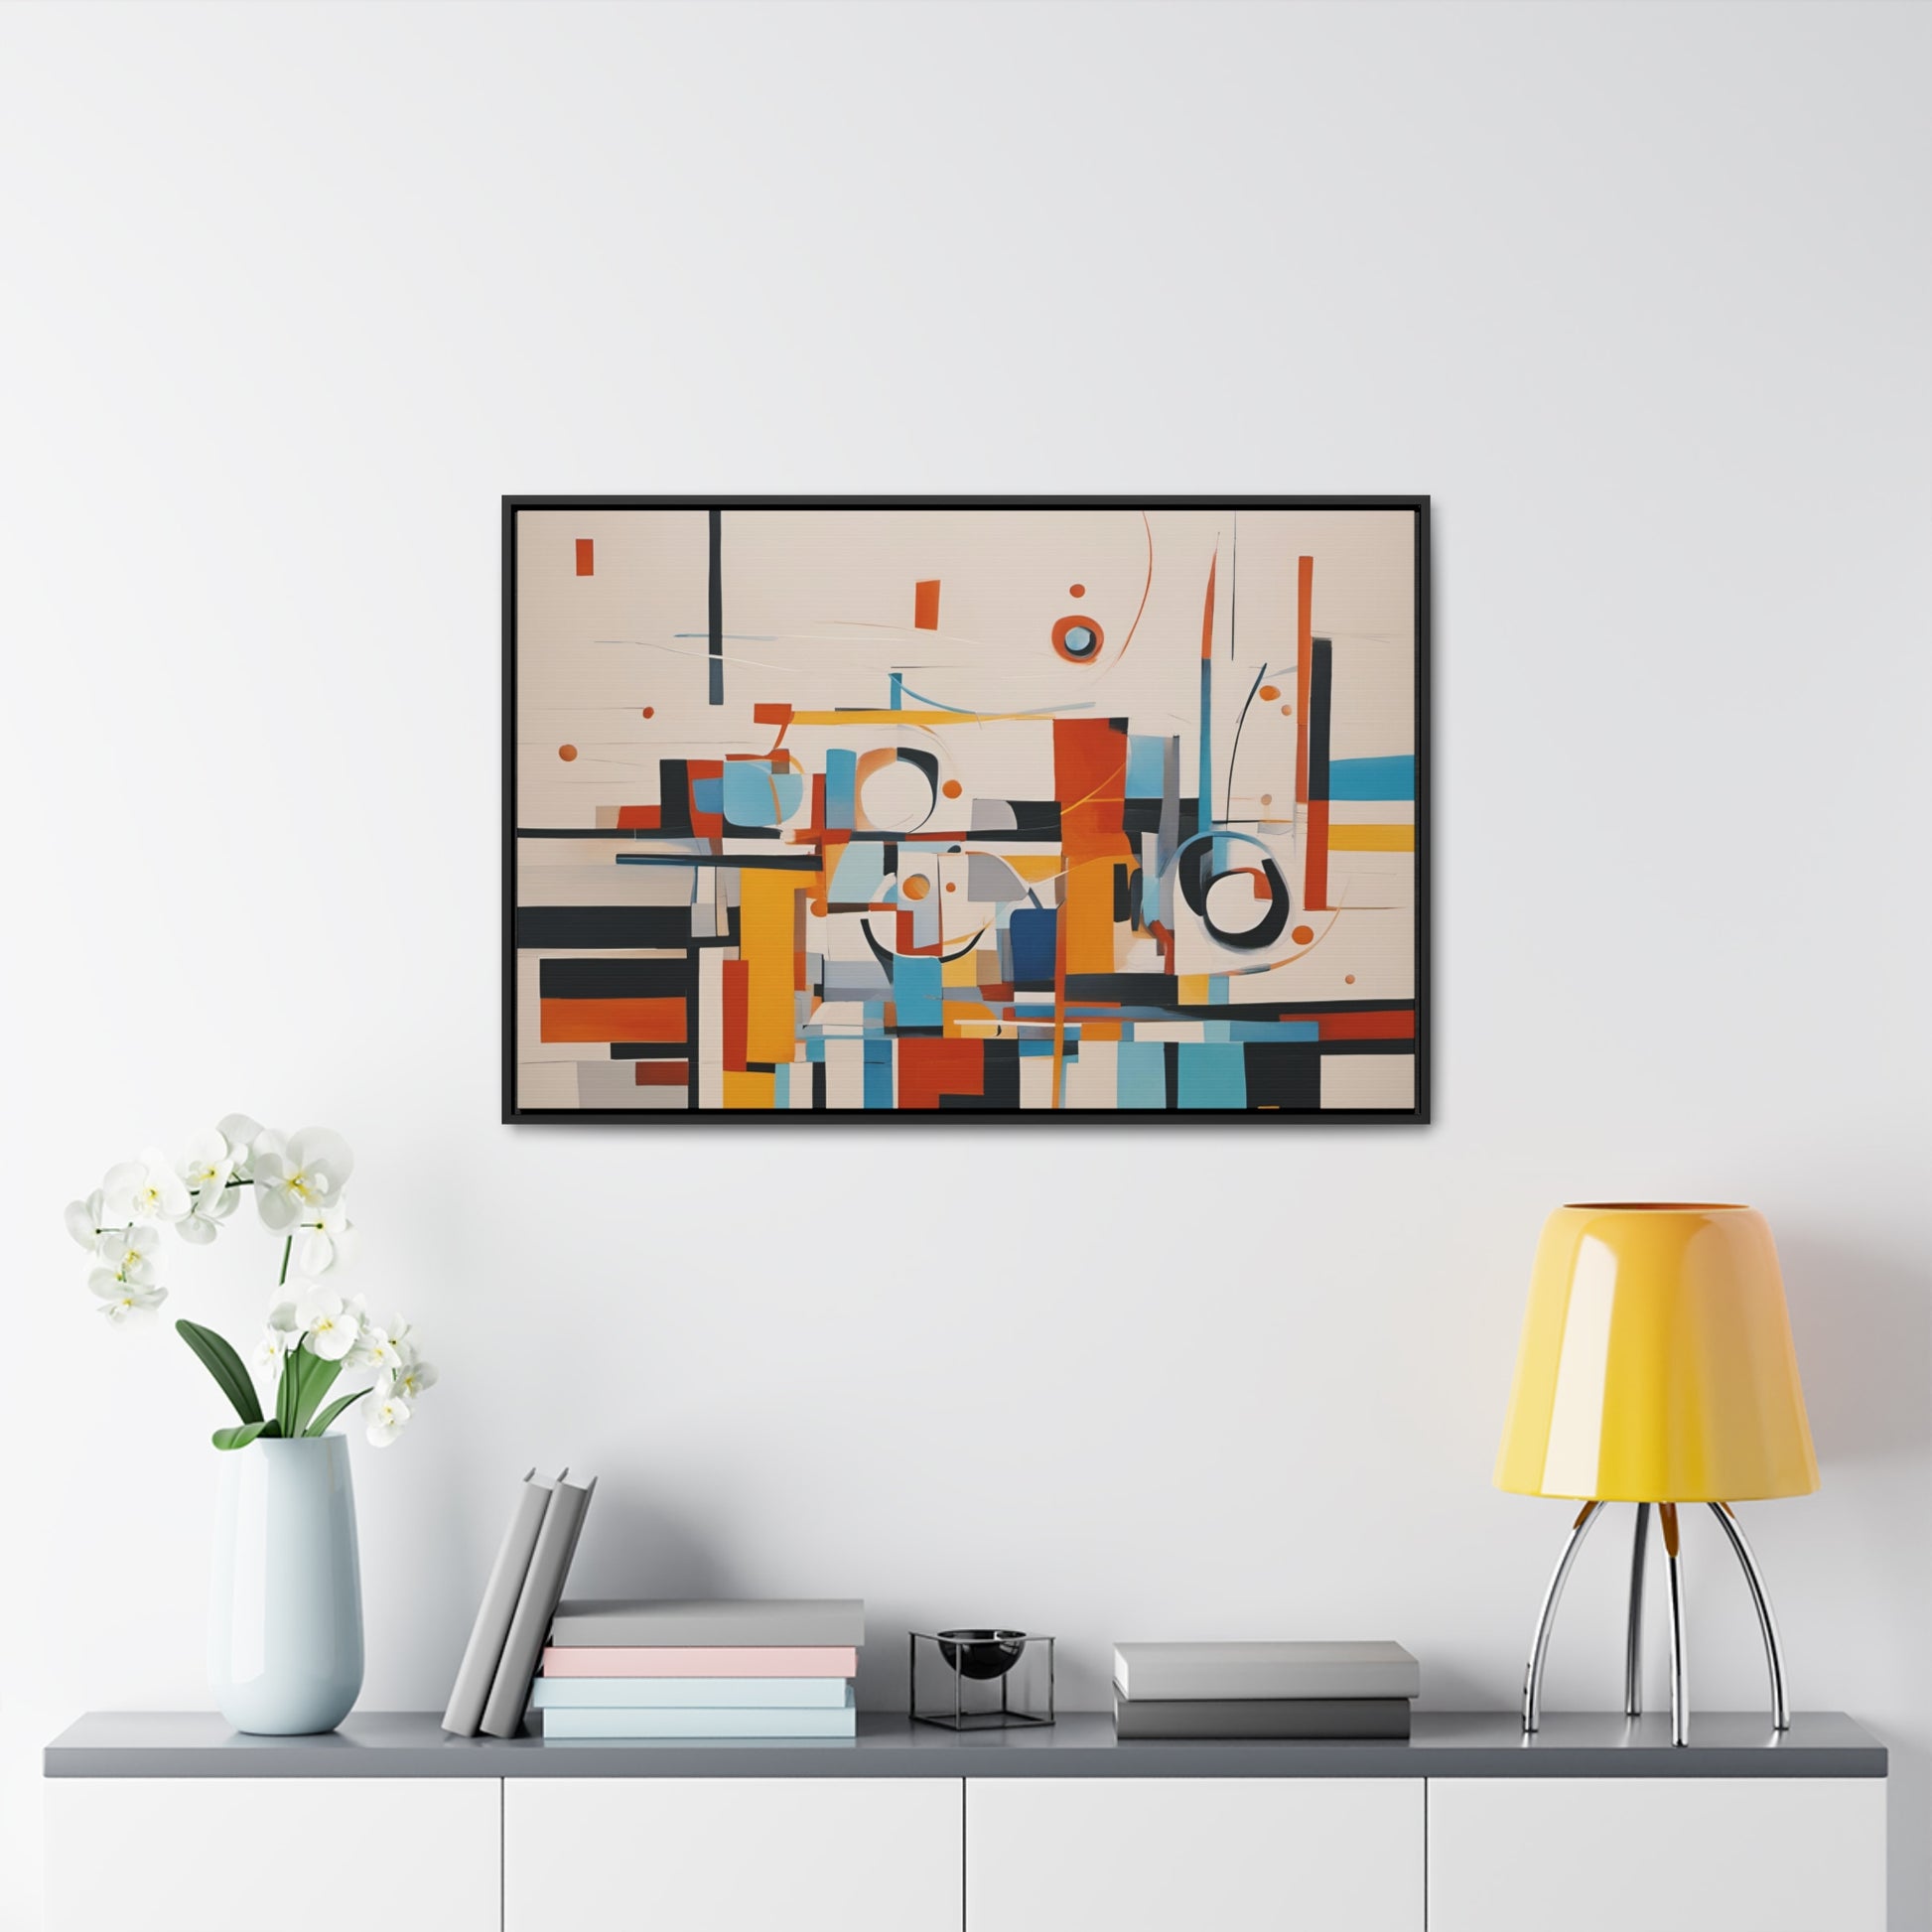 Modern Art Wall Print Mid Century Cubism Print on Canvas in a Floating Frame 36x24 Hung